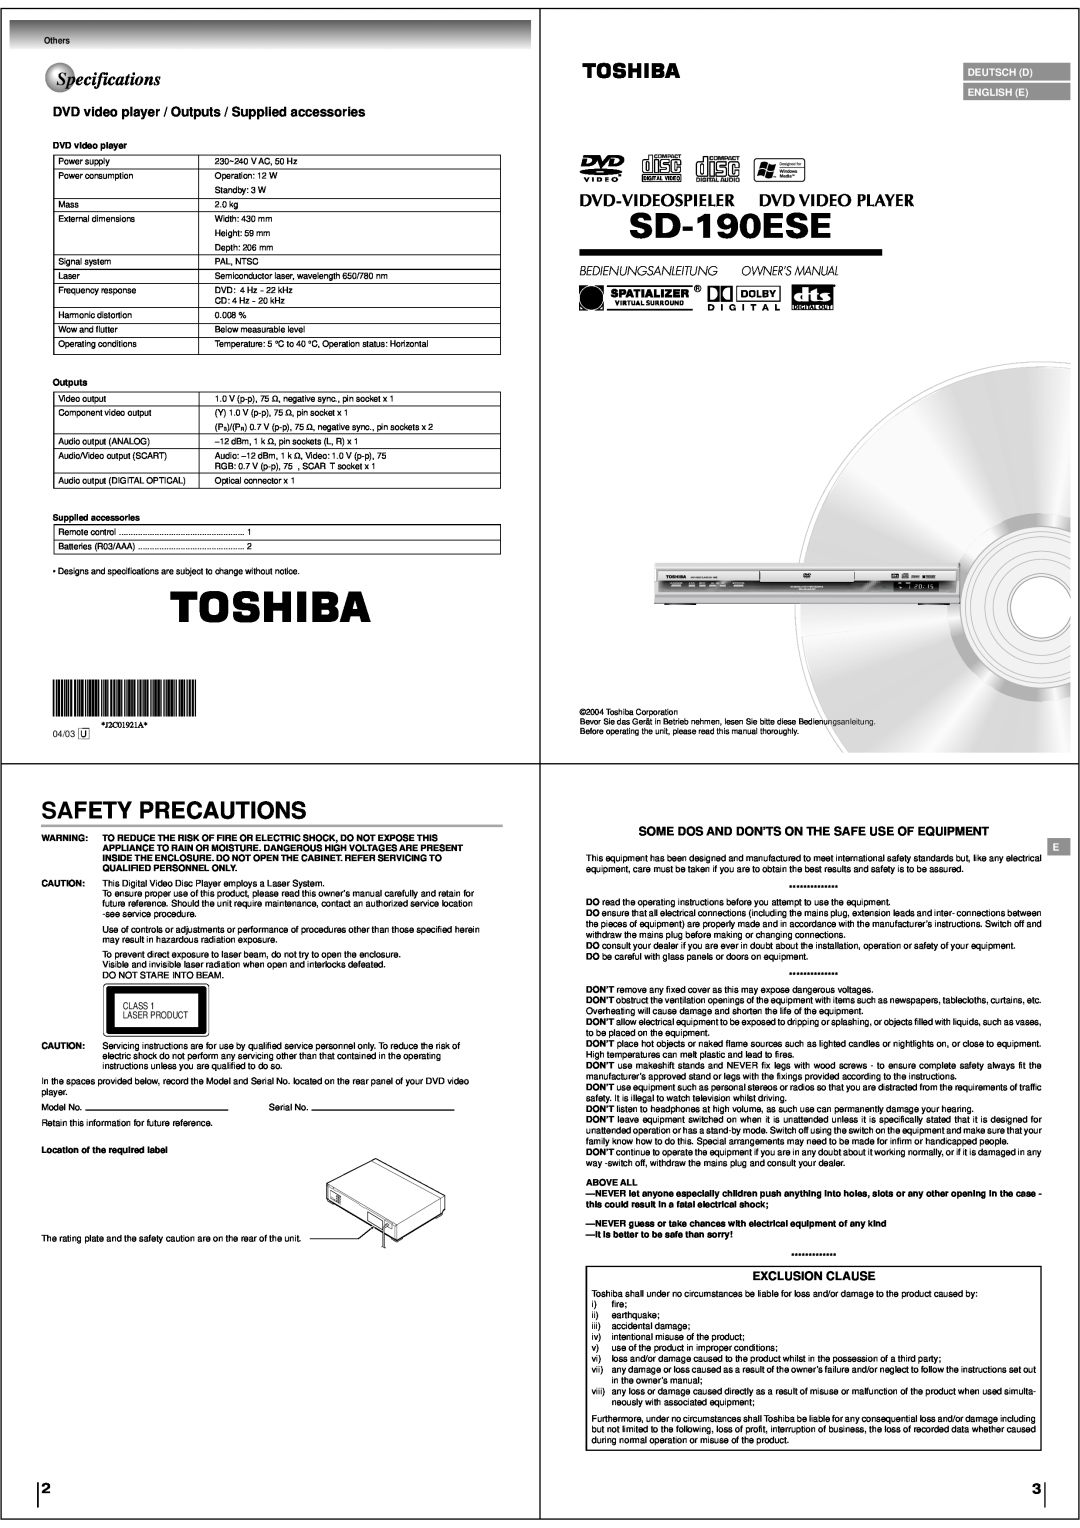 Toshiba SD-190ESE specifications Specifications, Safety Precautions, Dvd Video Player, Dvd-Videospieler, Owner’S Manual 